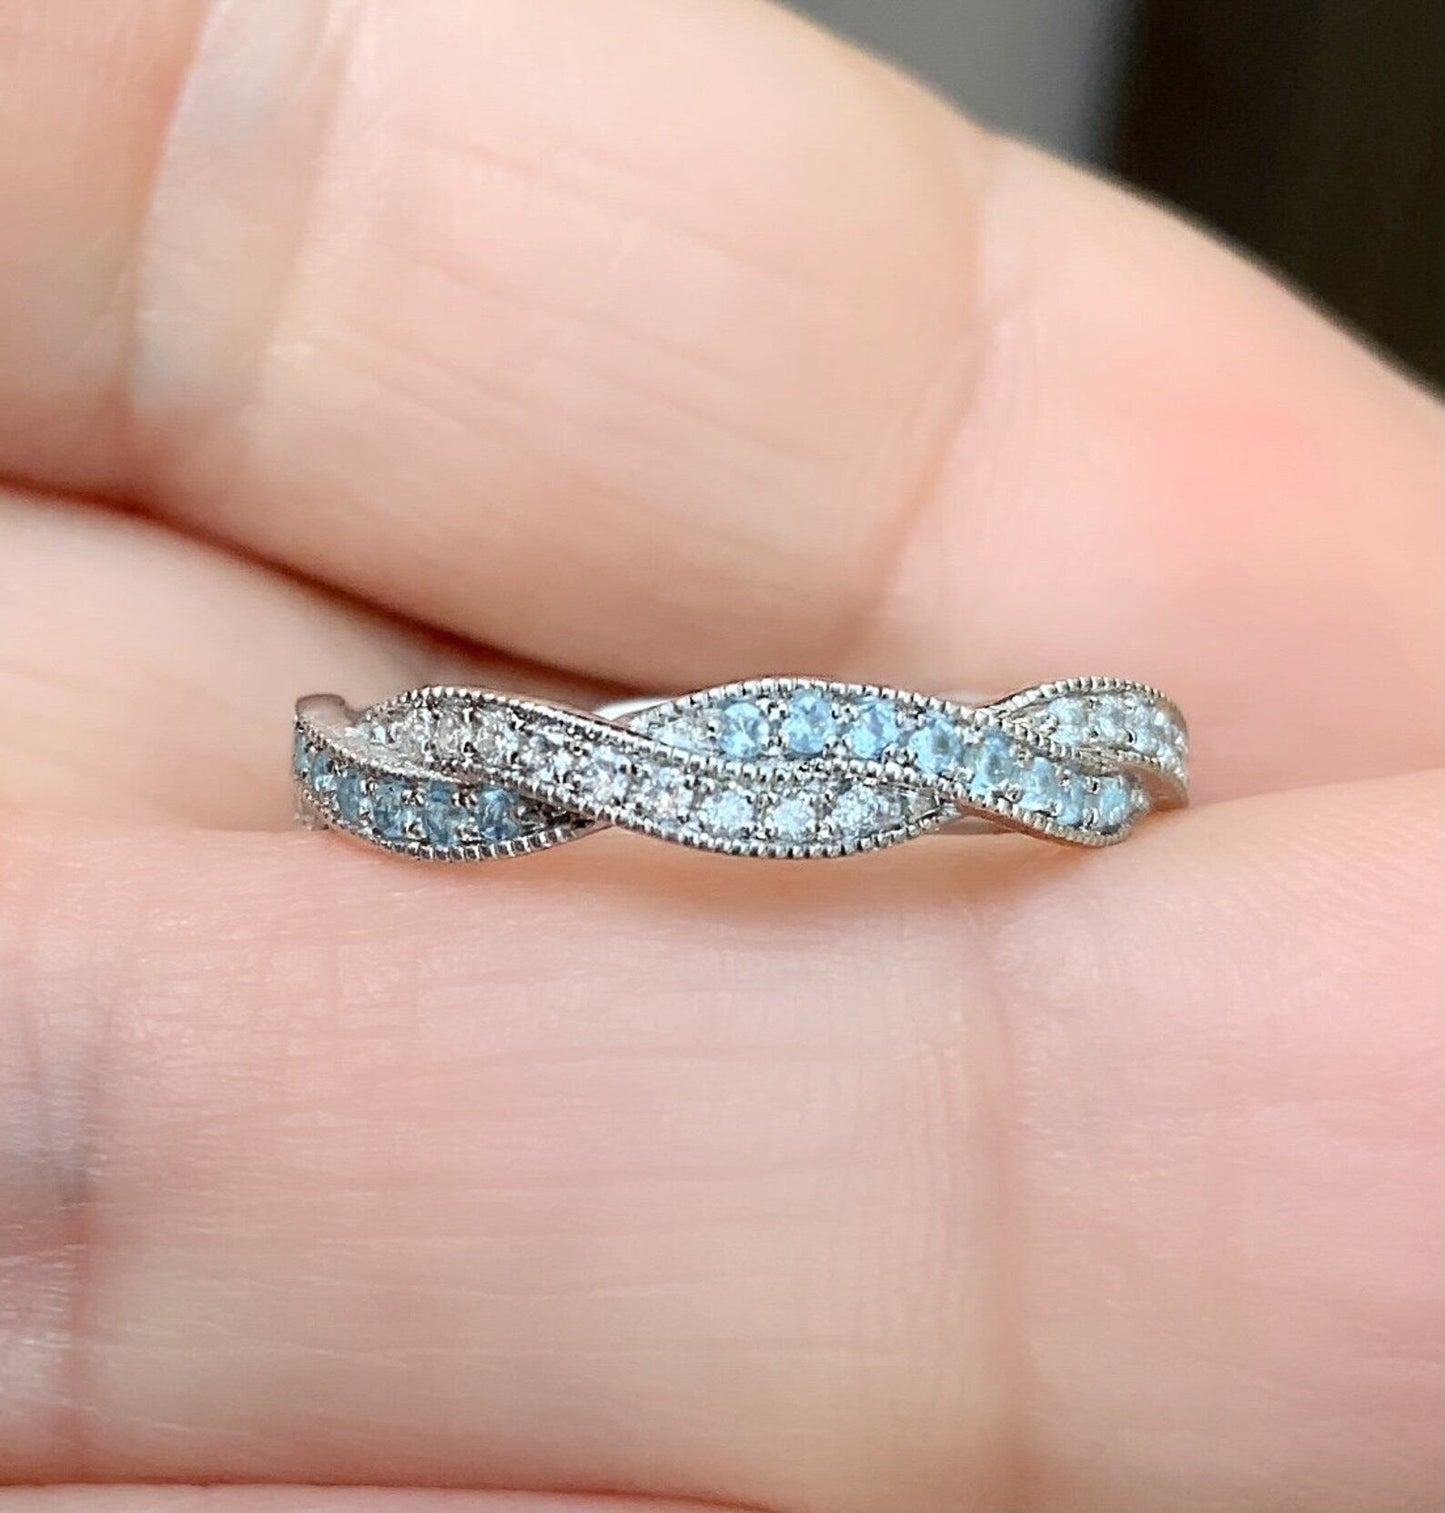 Reserved for Giovana/ Upgrade to 6mm Twisted Band with Natural Diamonds and Aquamarines